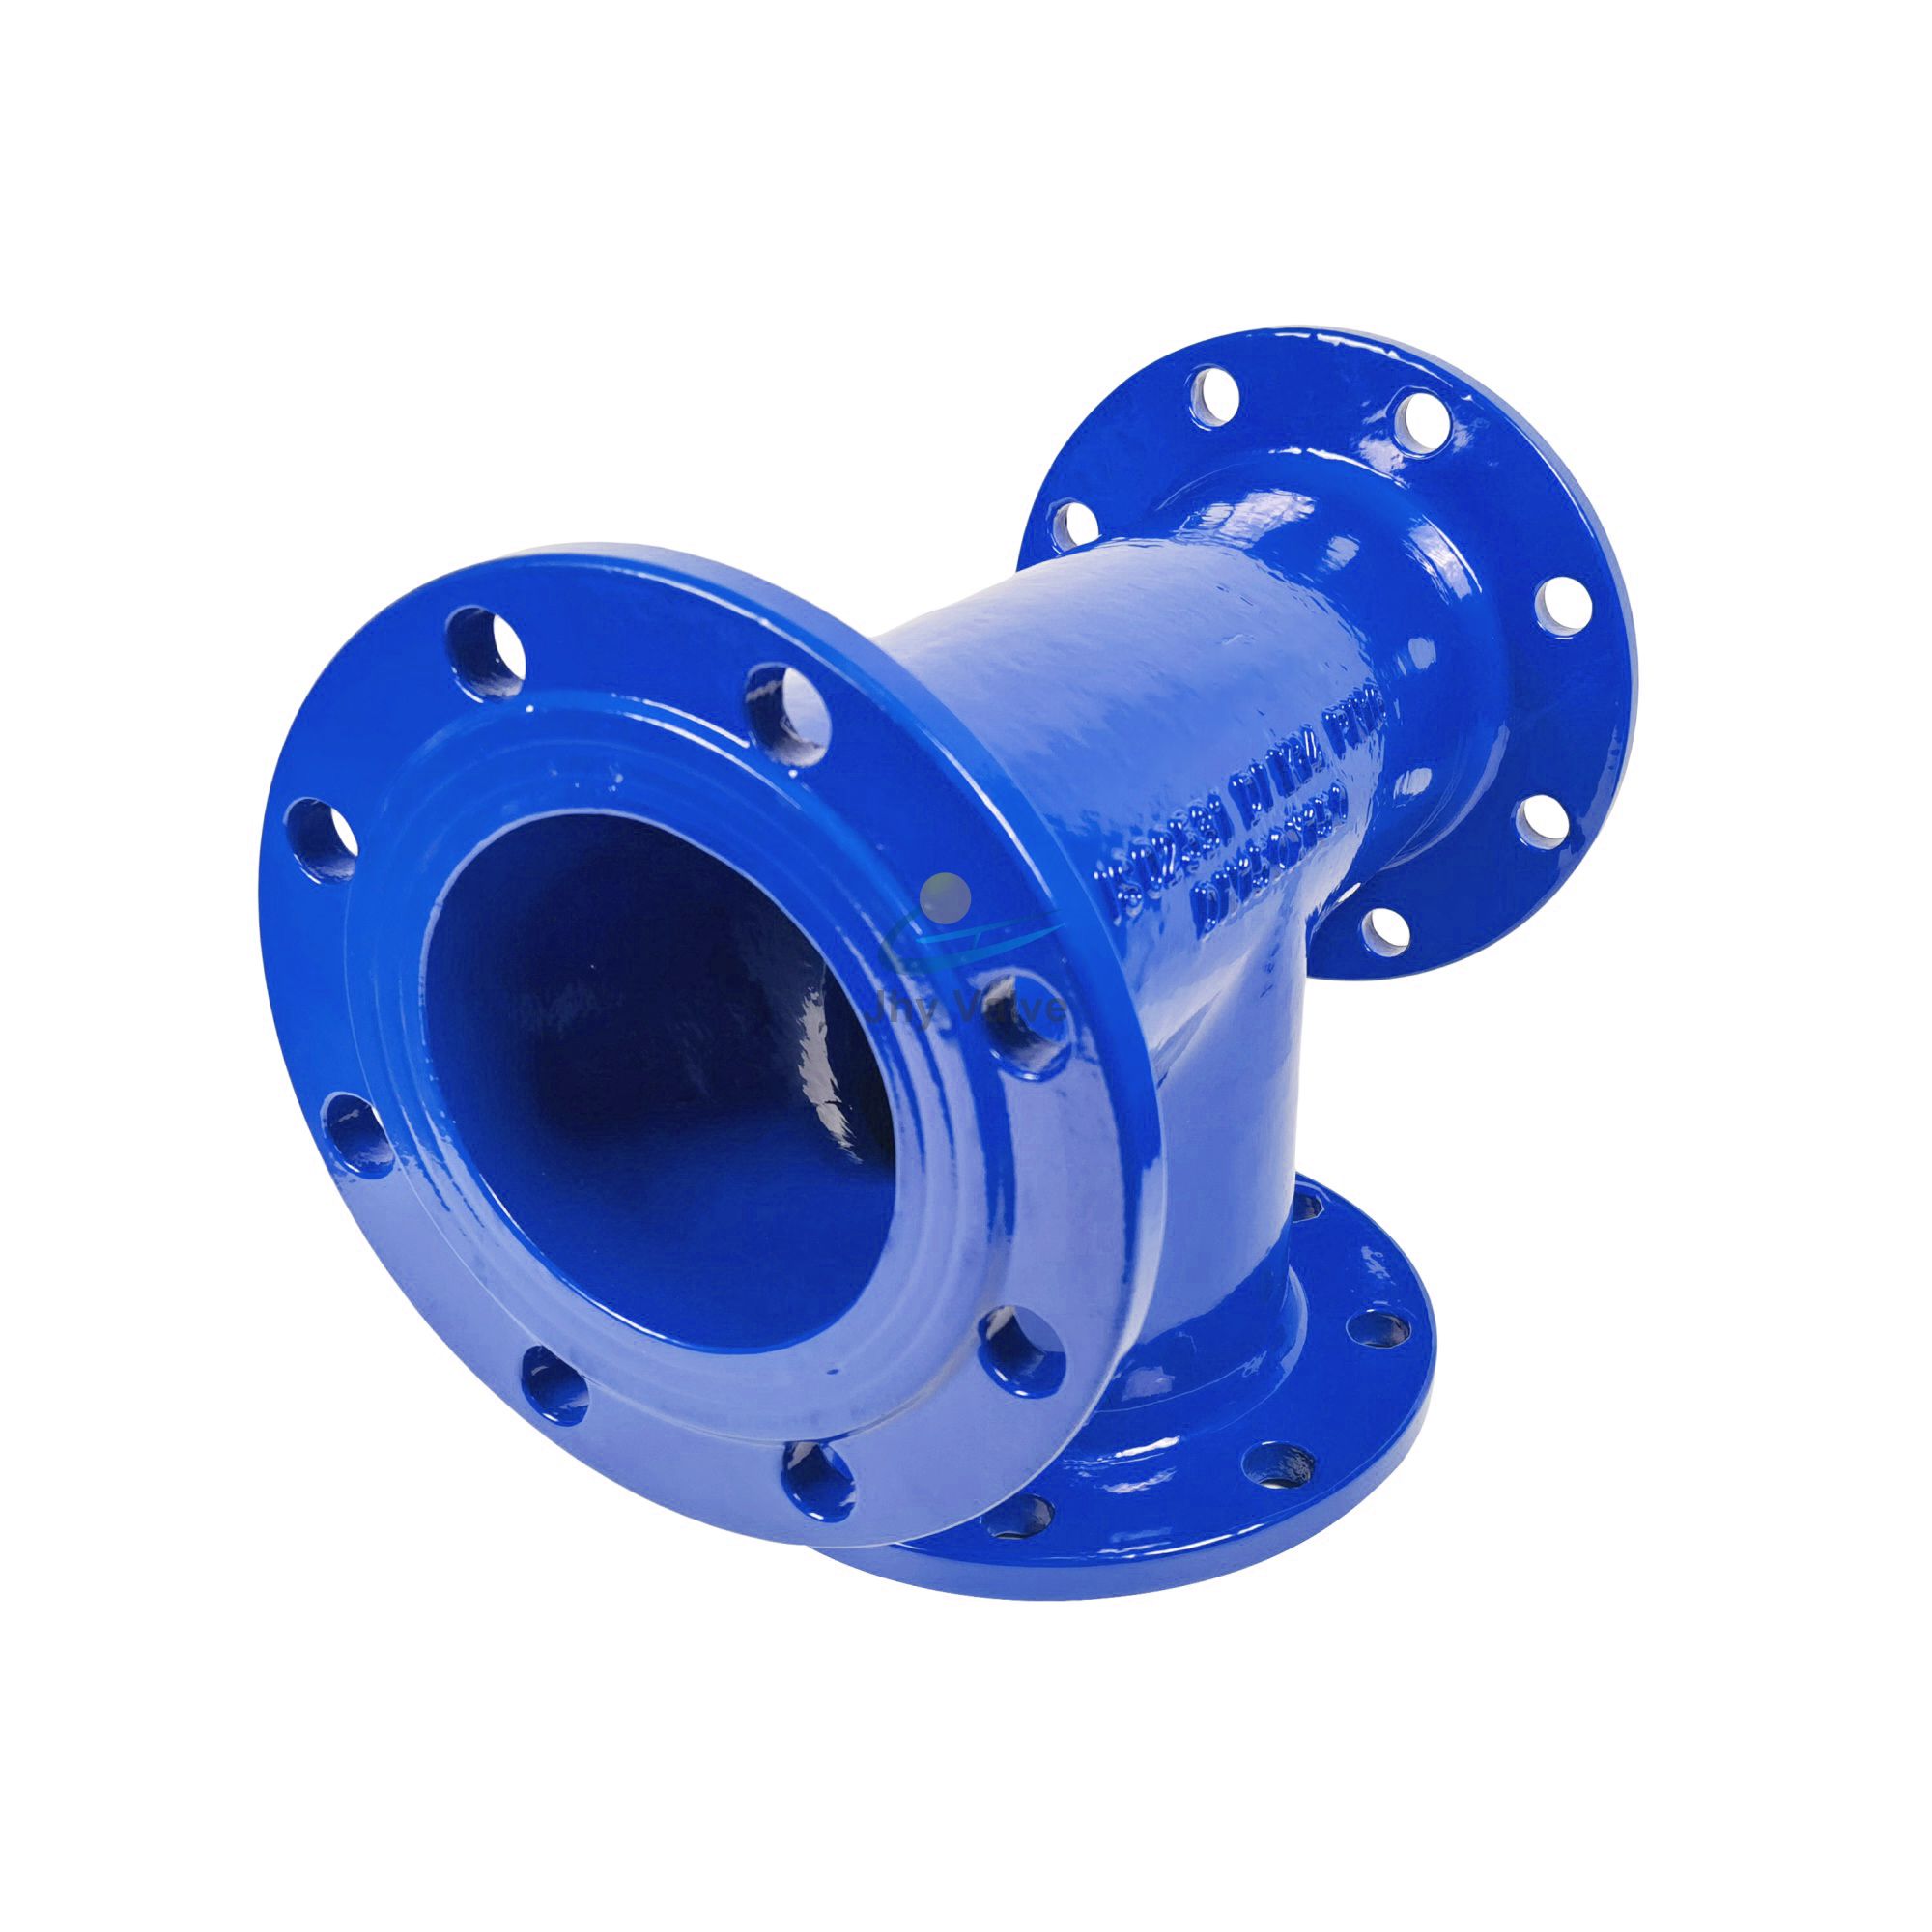 All Flanged Tee Fittings  Series T